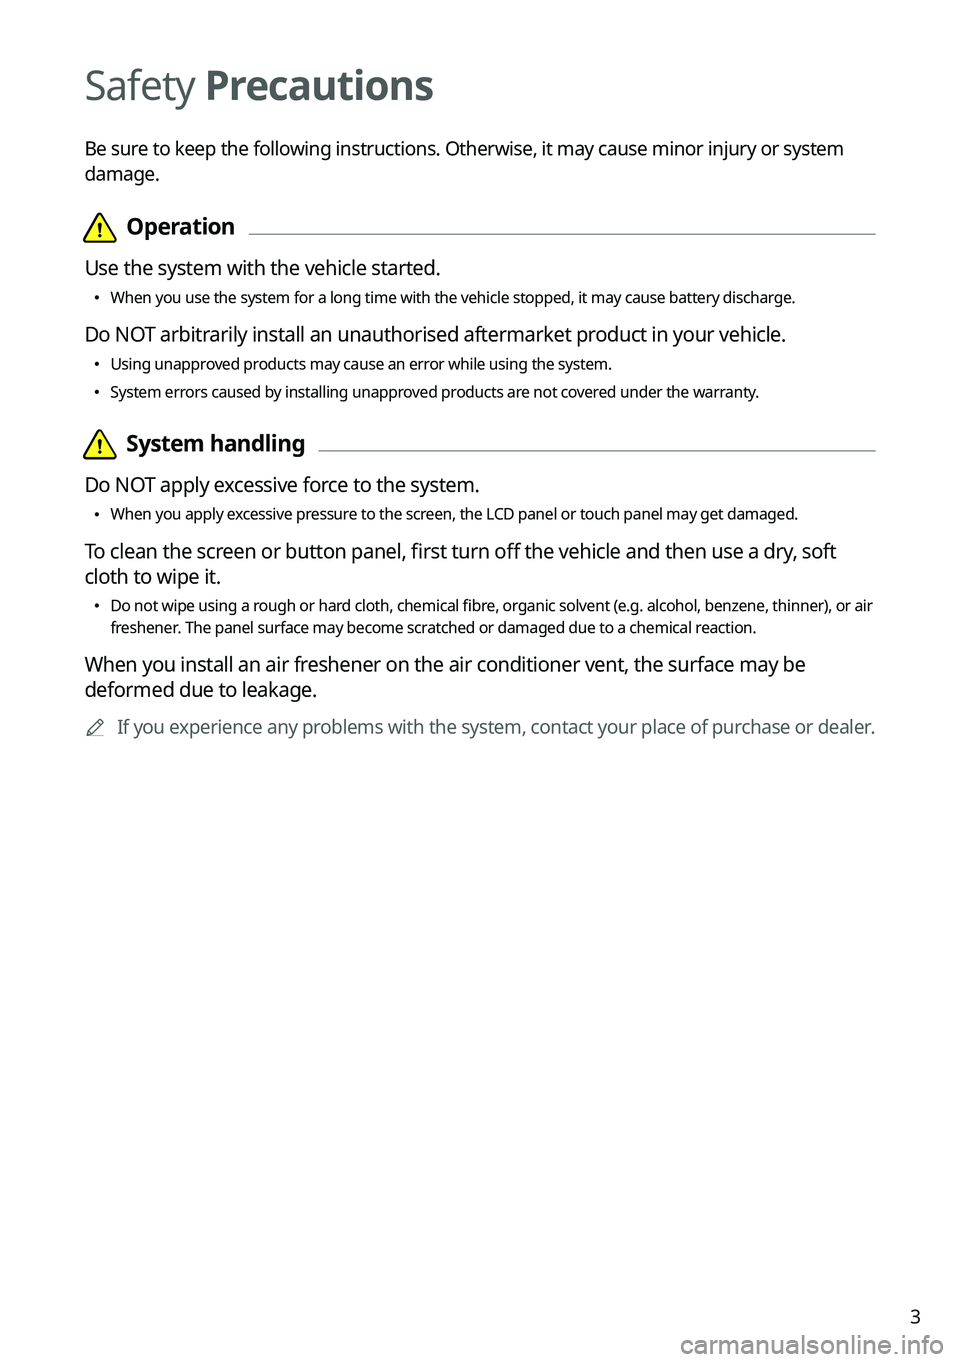 KIA NIRO EV 2023  Navigation System Quick Reference Guide 3
Safety Precautions
Be sure to keep the following instructions. Otherwise, it may cause minor injury or system 
damage. 
  